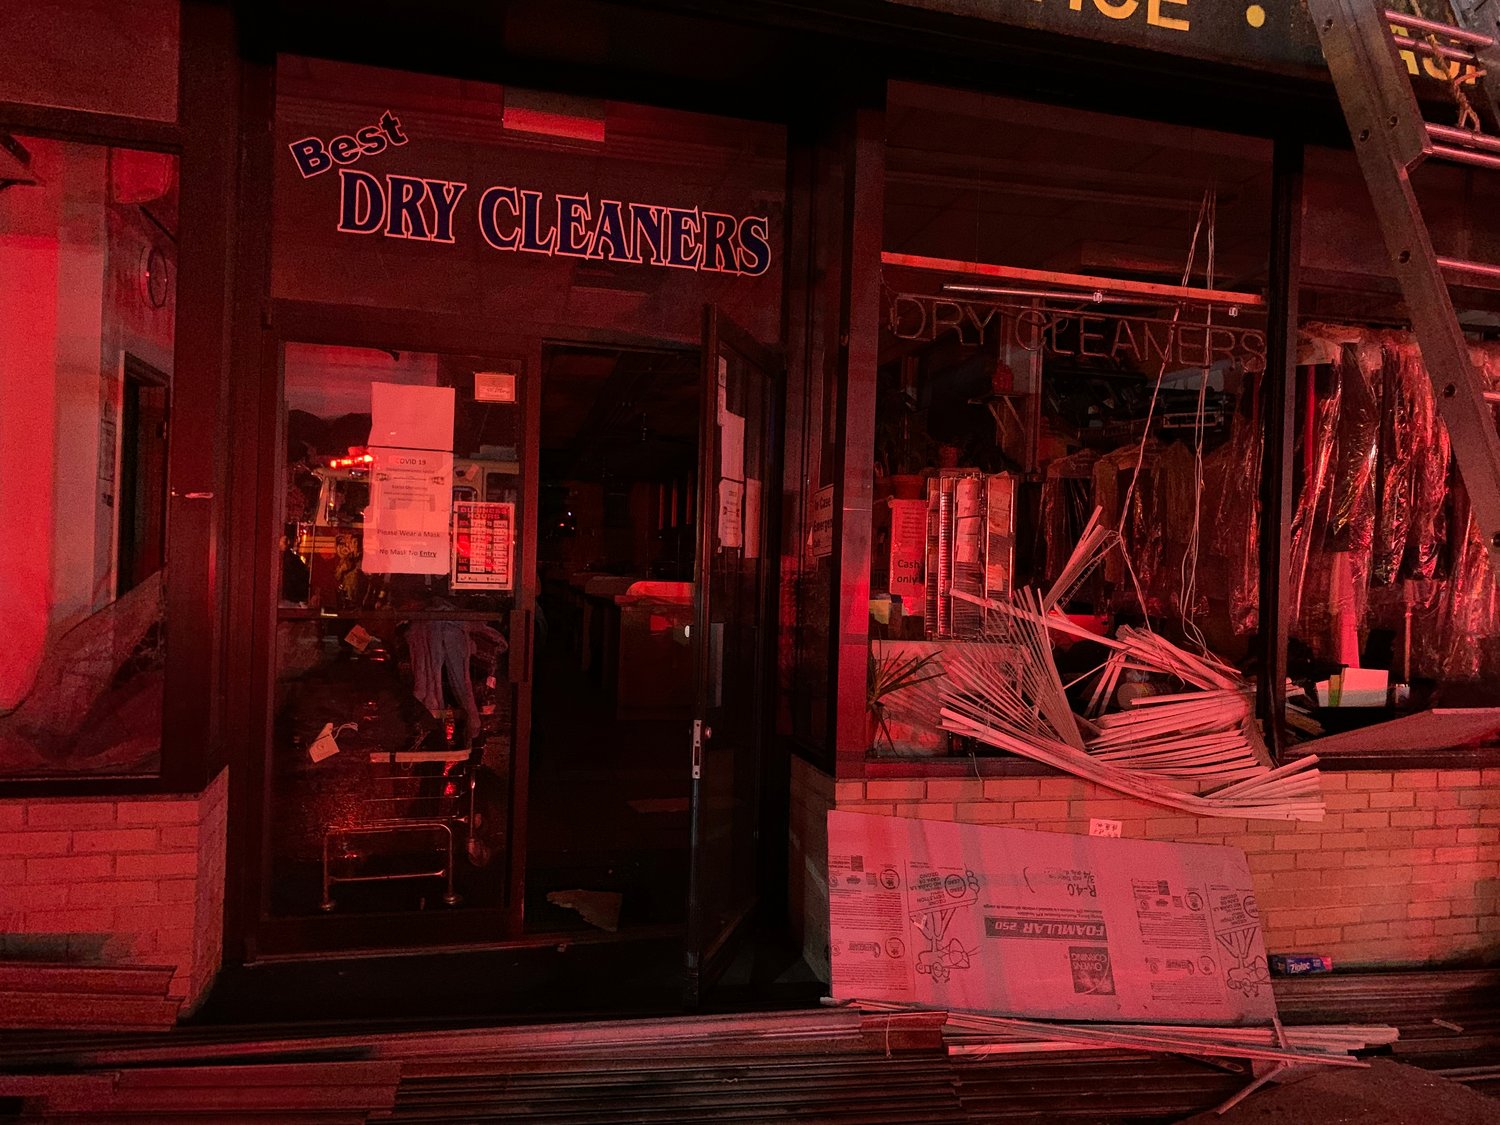 Best Laundromat at 3642 Bailey Ave., appeared to suffer some significant ceiling and front display window damage during a four-alarm fire late Monday night. Most of the existing clothes being stored there, however, appeared to have remained intact.